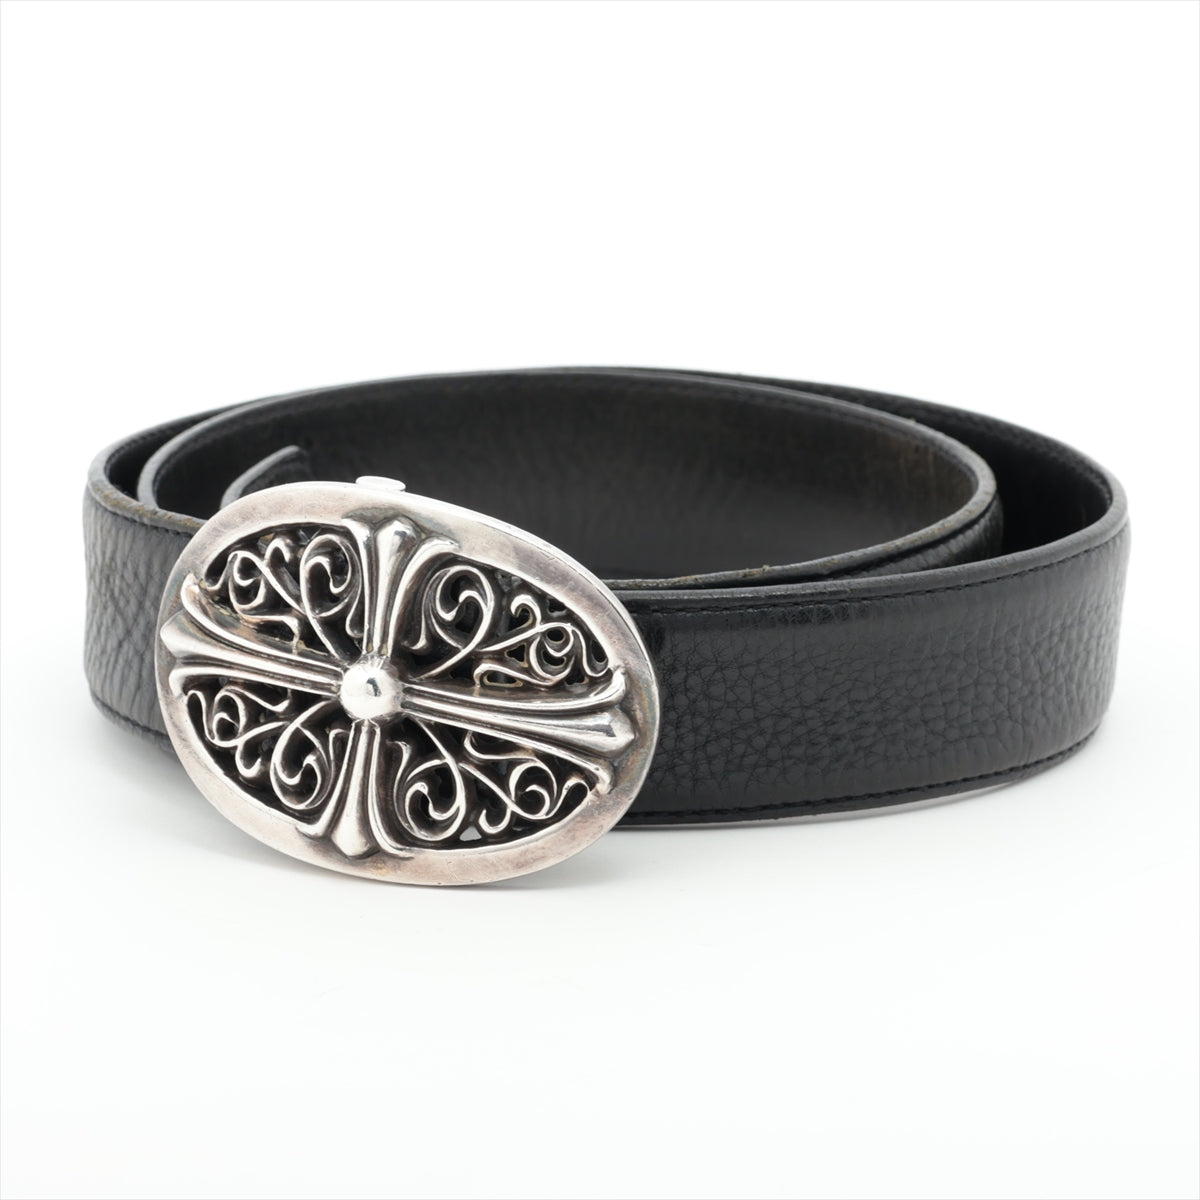 Chrome Hearts classic oval cross Belt Leather & 925 size 34 Black × Silver 1.5